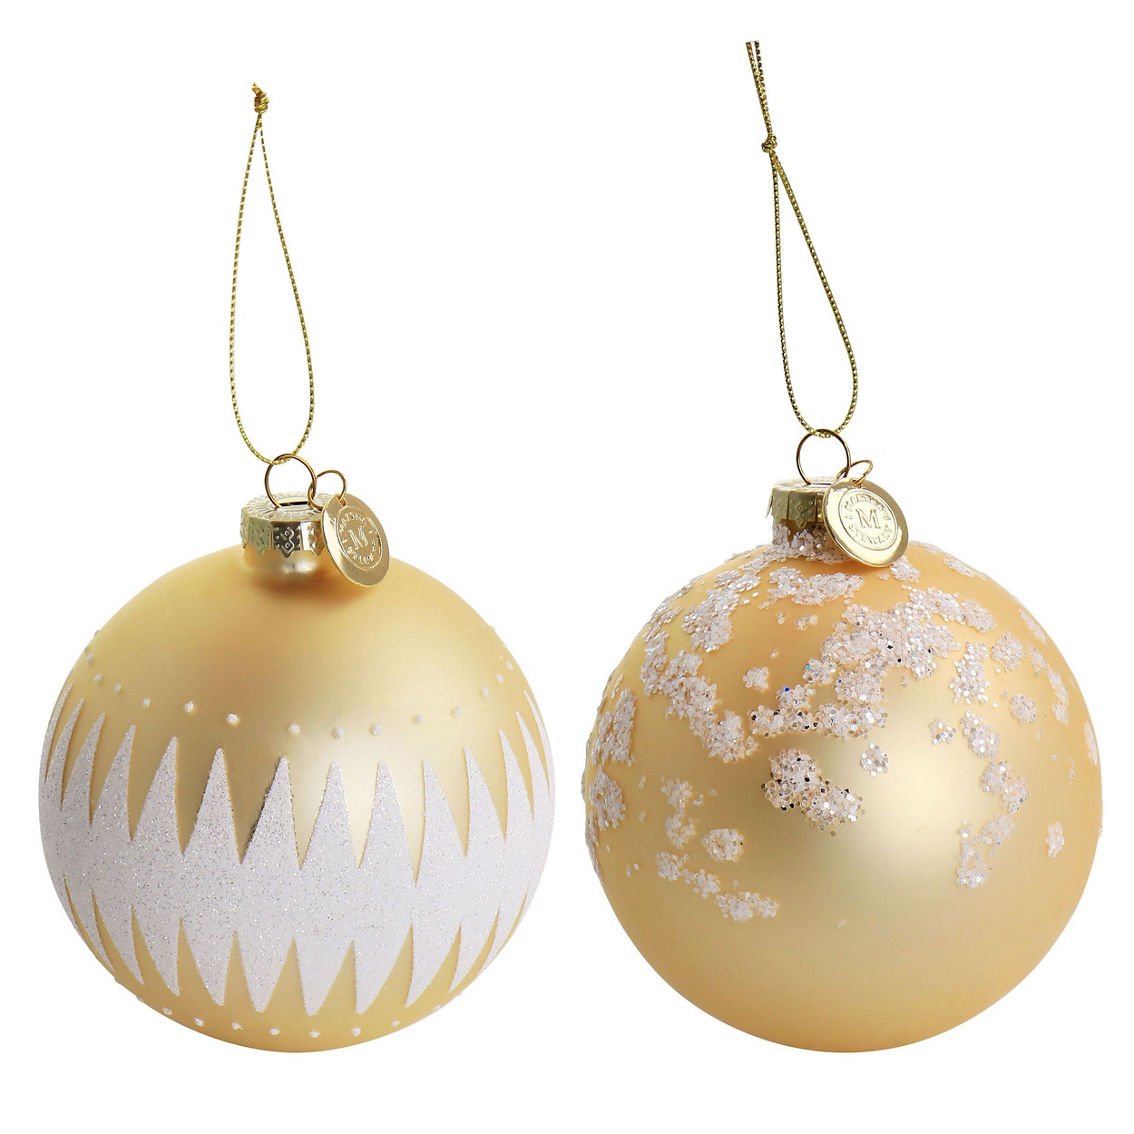 Martha Stewart Holiday Ball Ornament 4 Piece Set in Gold - Image 4 of 5